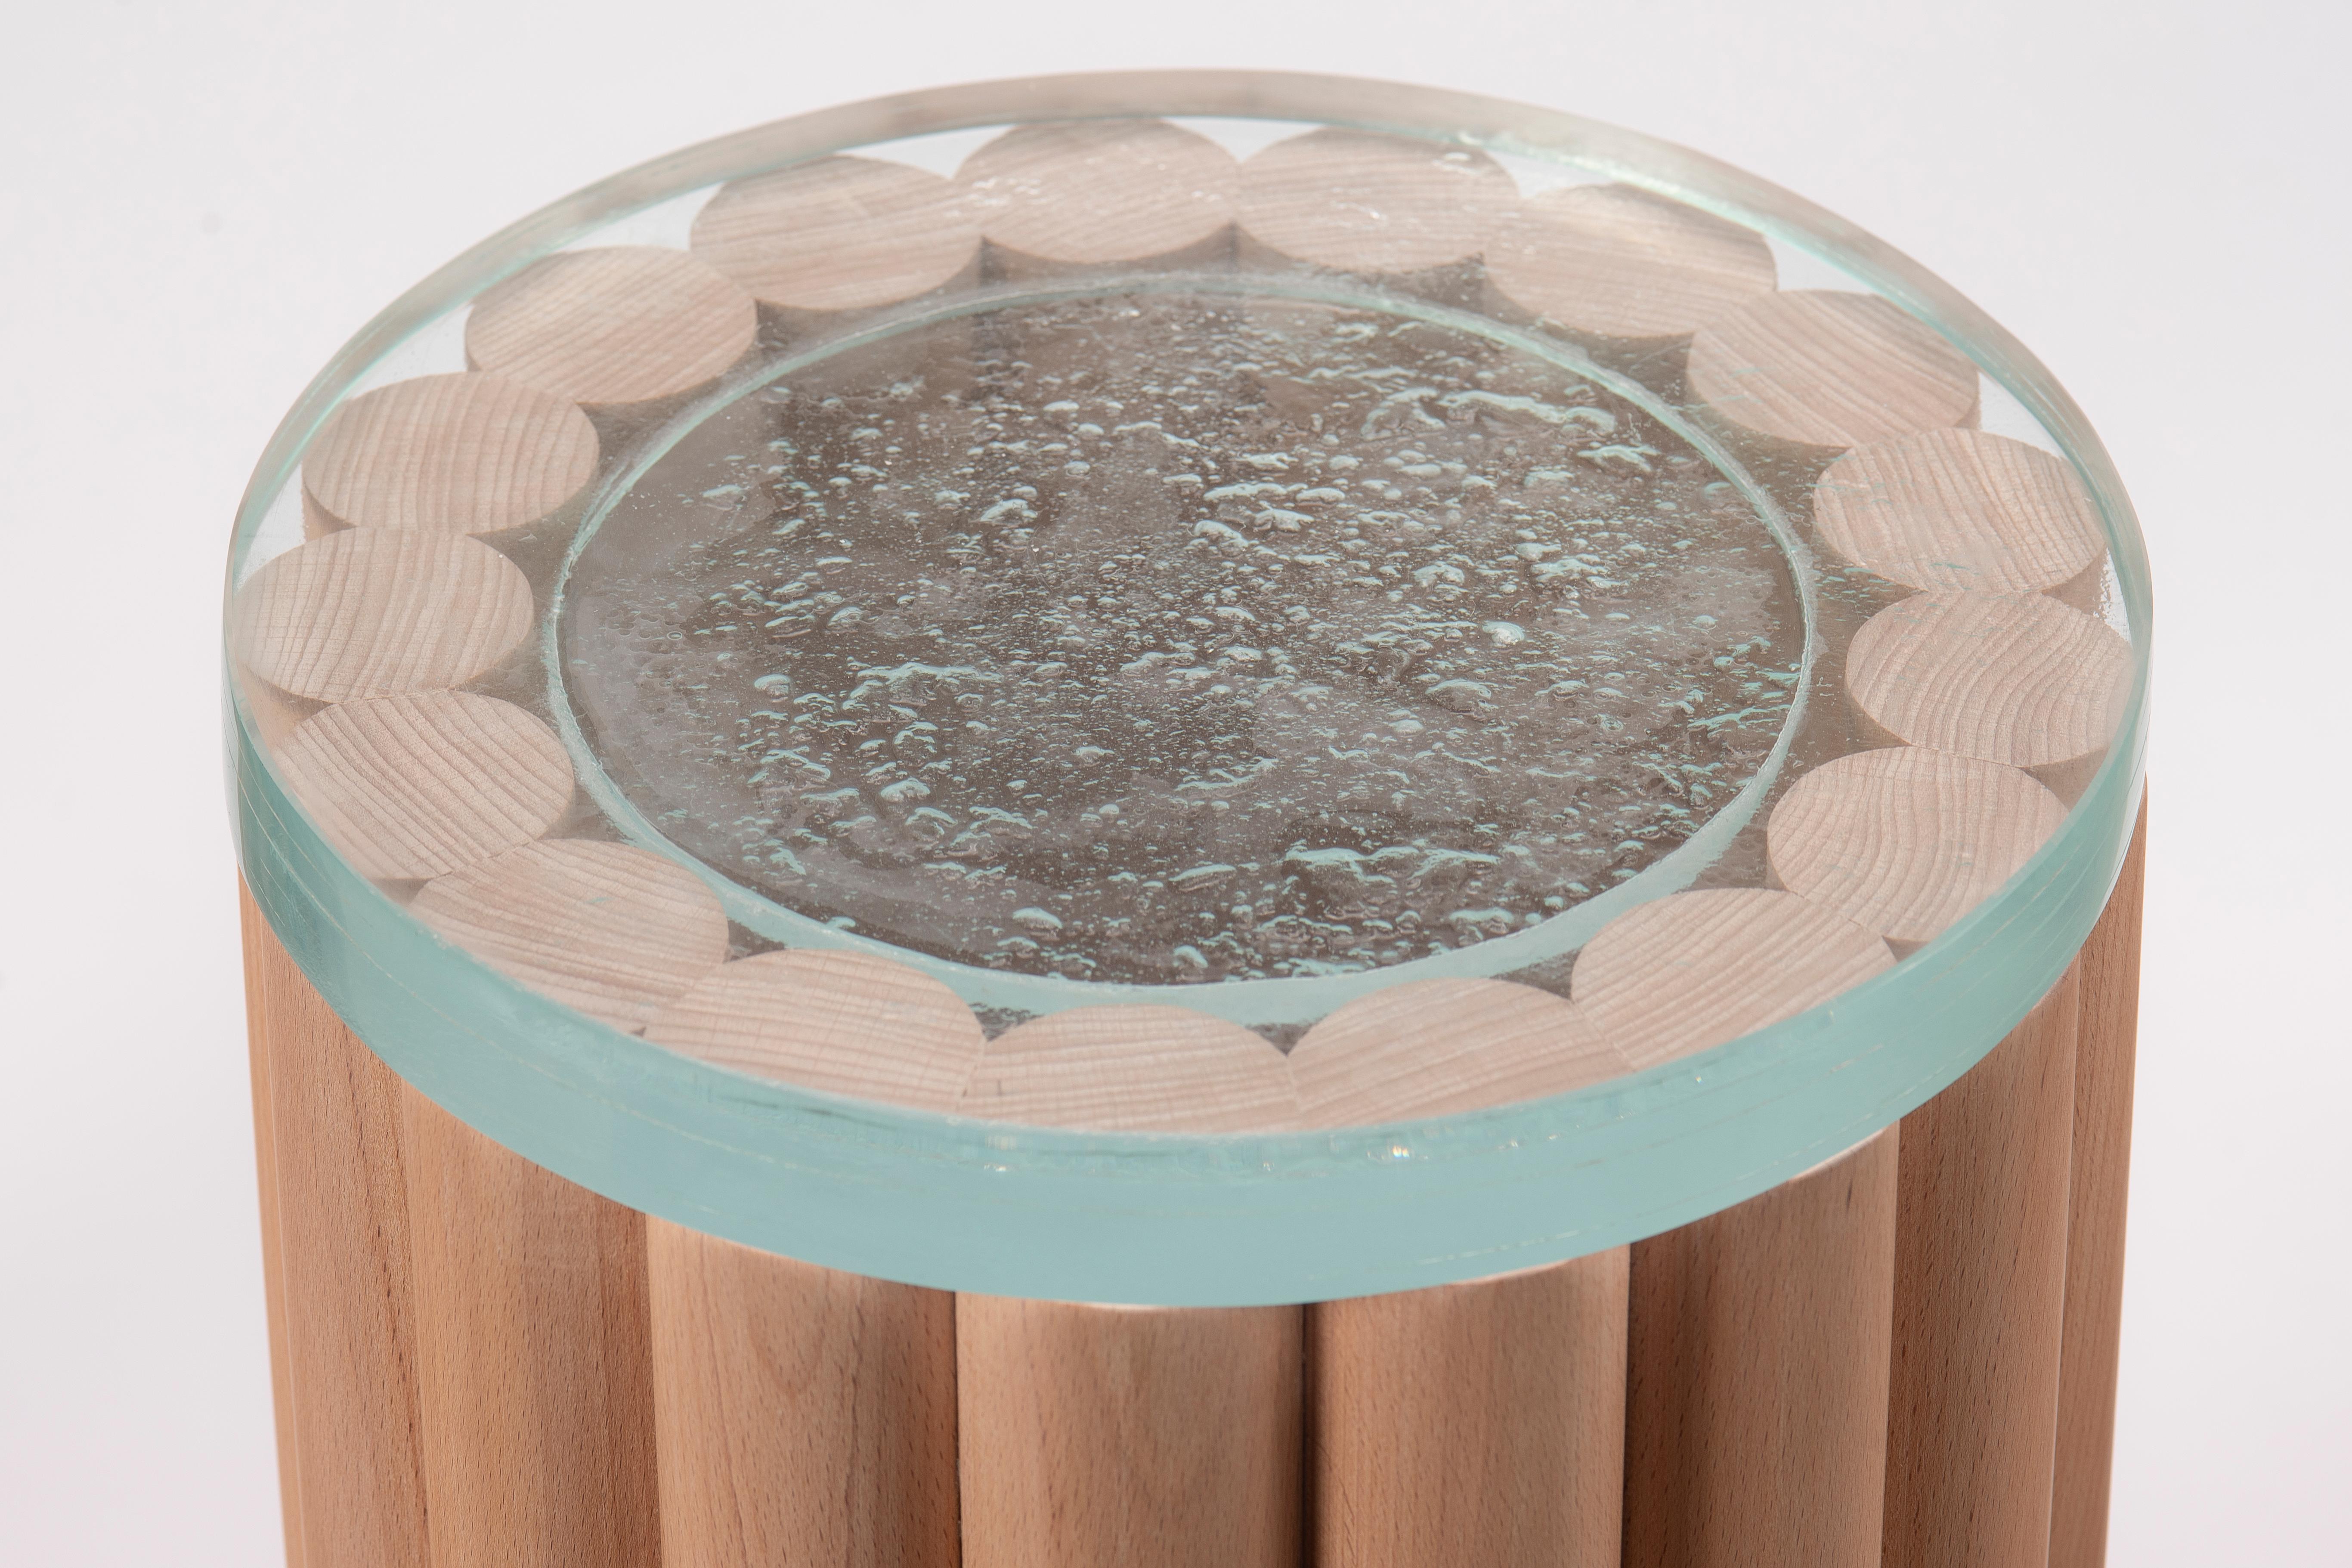 Loto Side Tables, Set of 2, Beech Wood and Fused Glass In New Condition For Sale In Zapopan, Jalisco